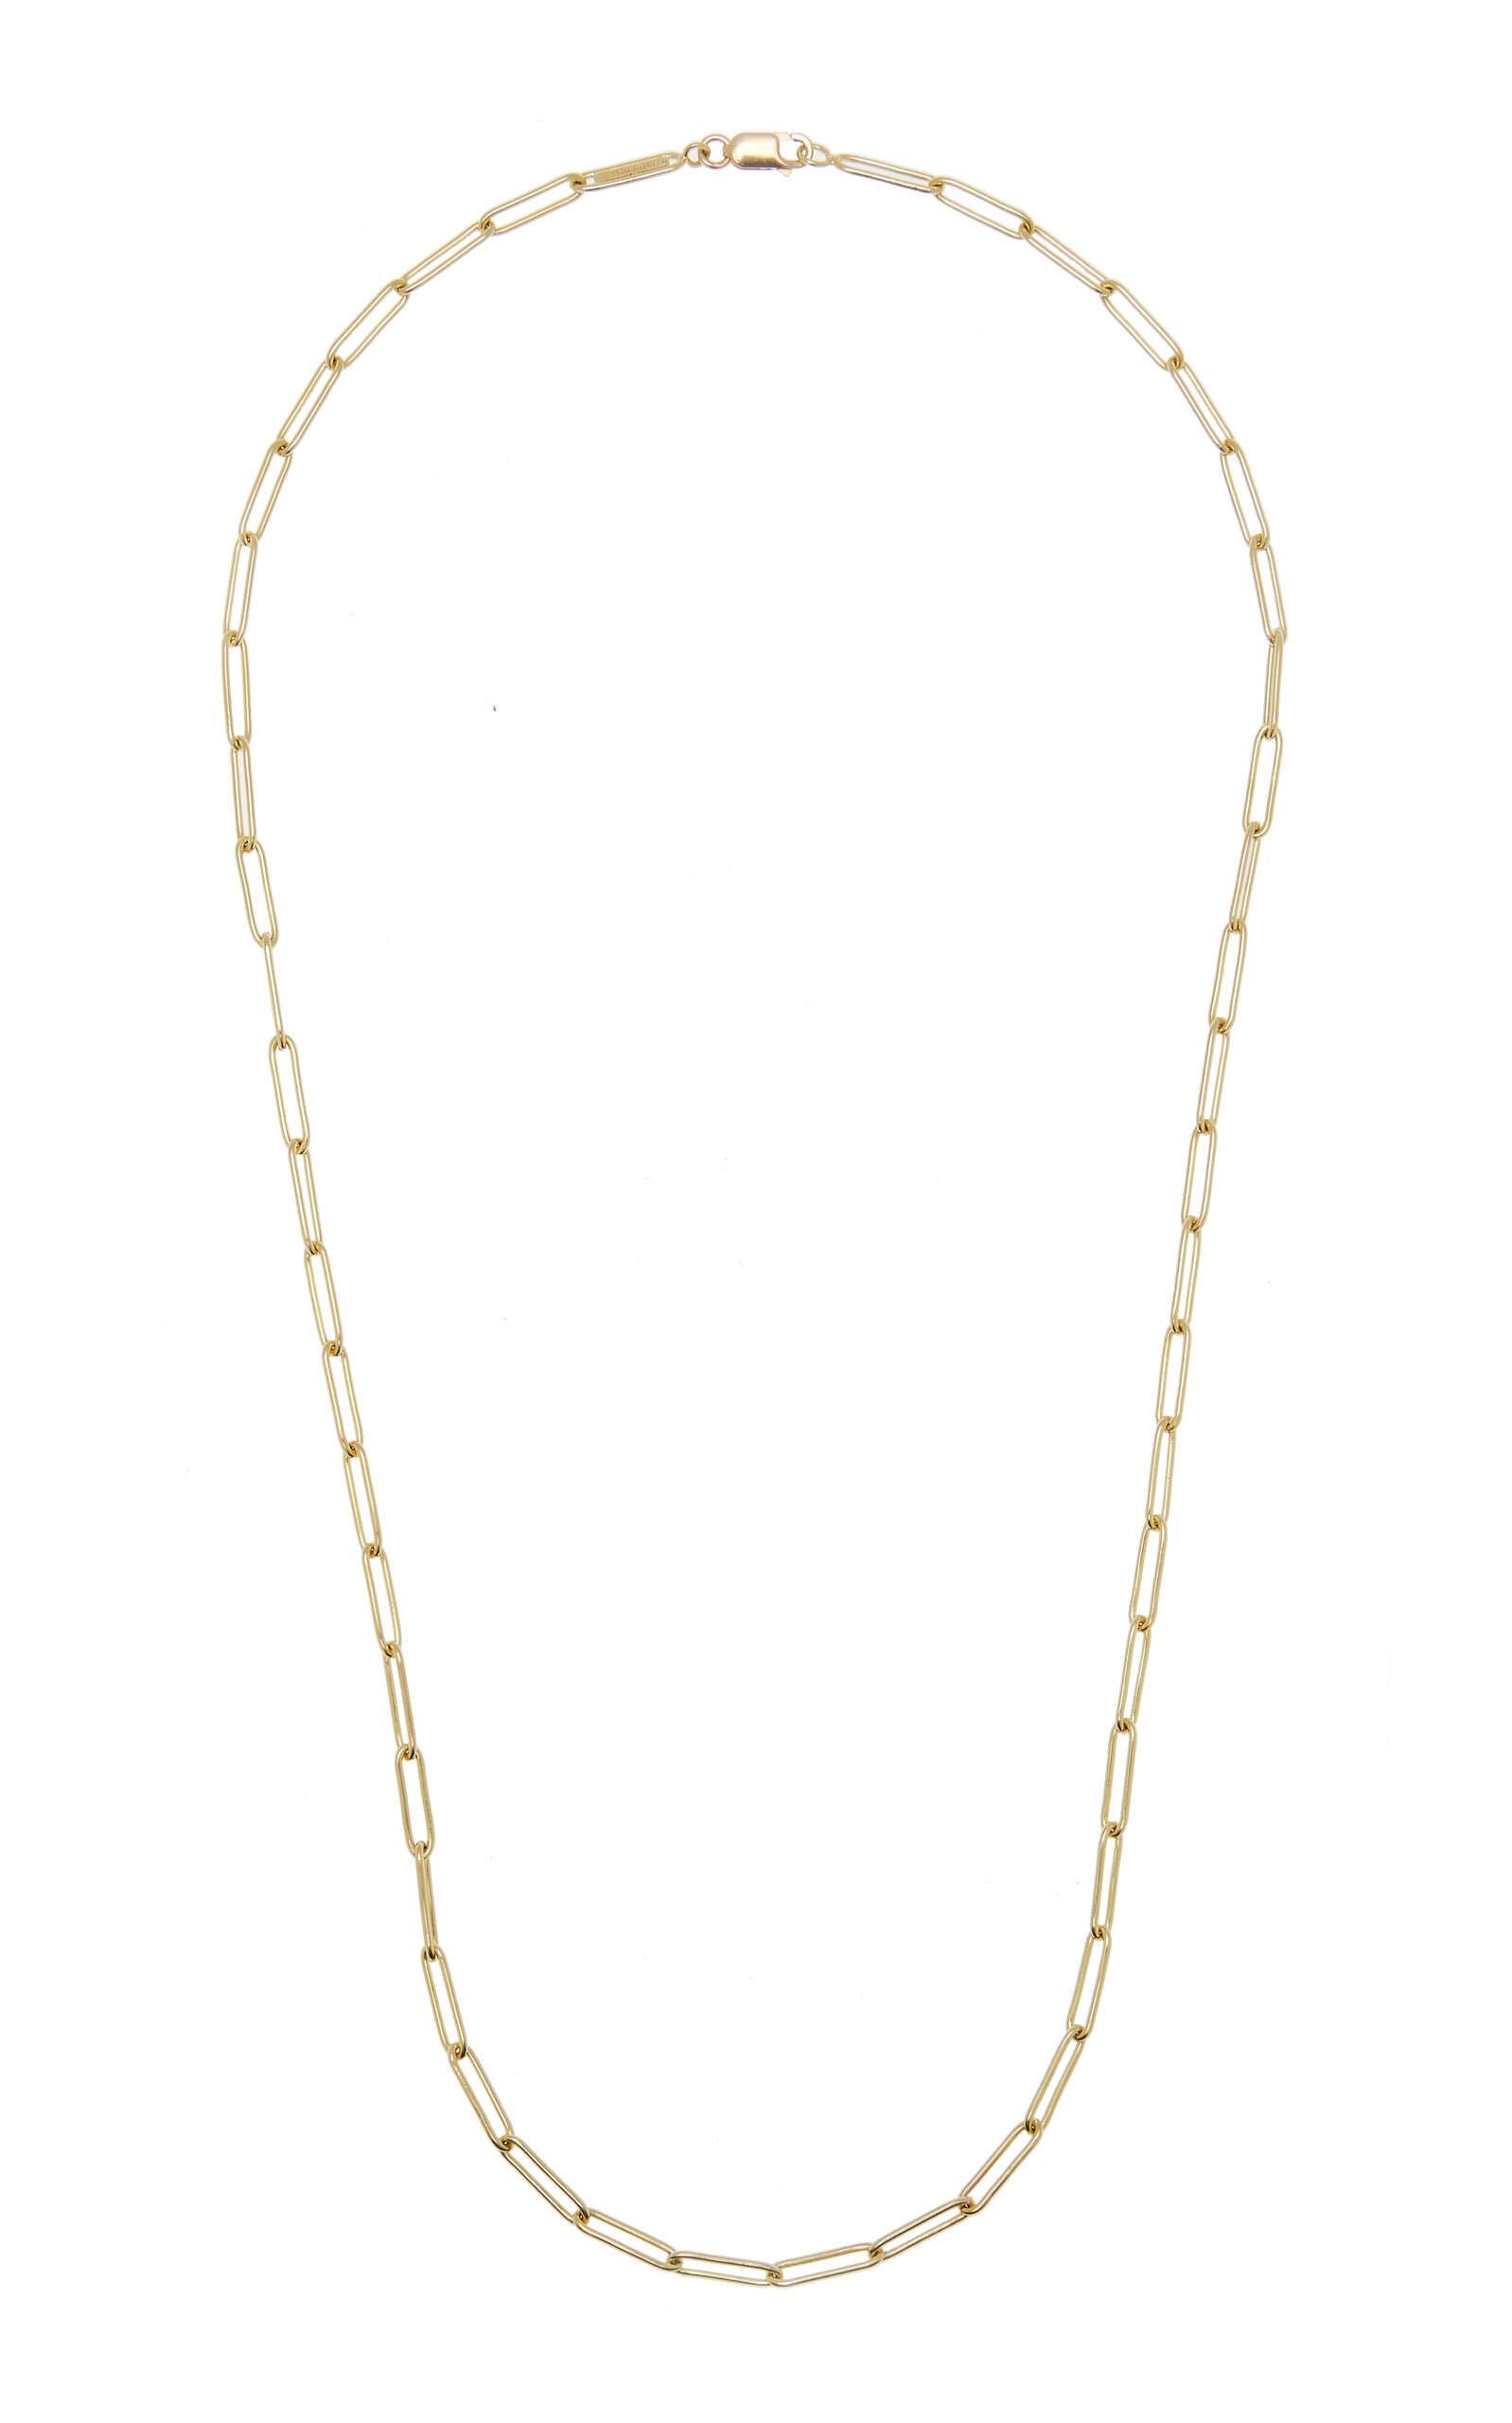 Handmade 18K Yellow Gold Chain Necklace